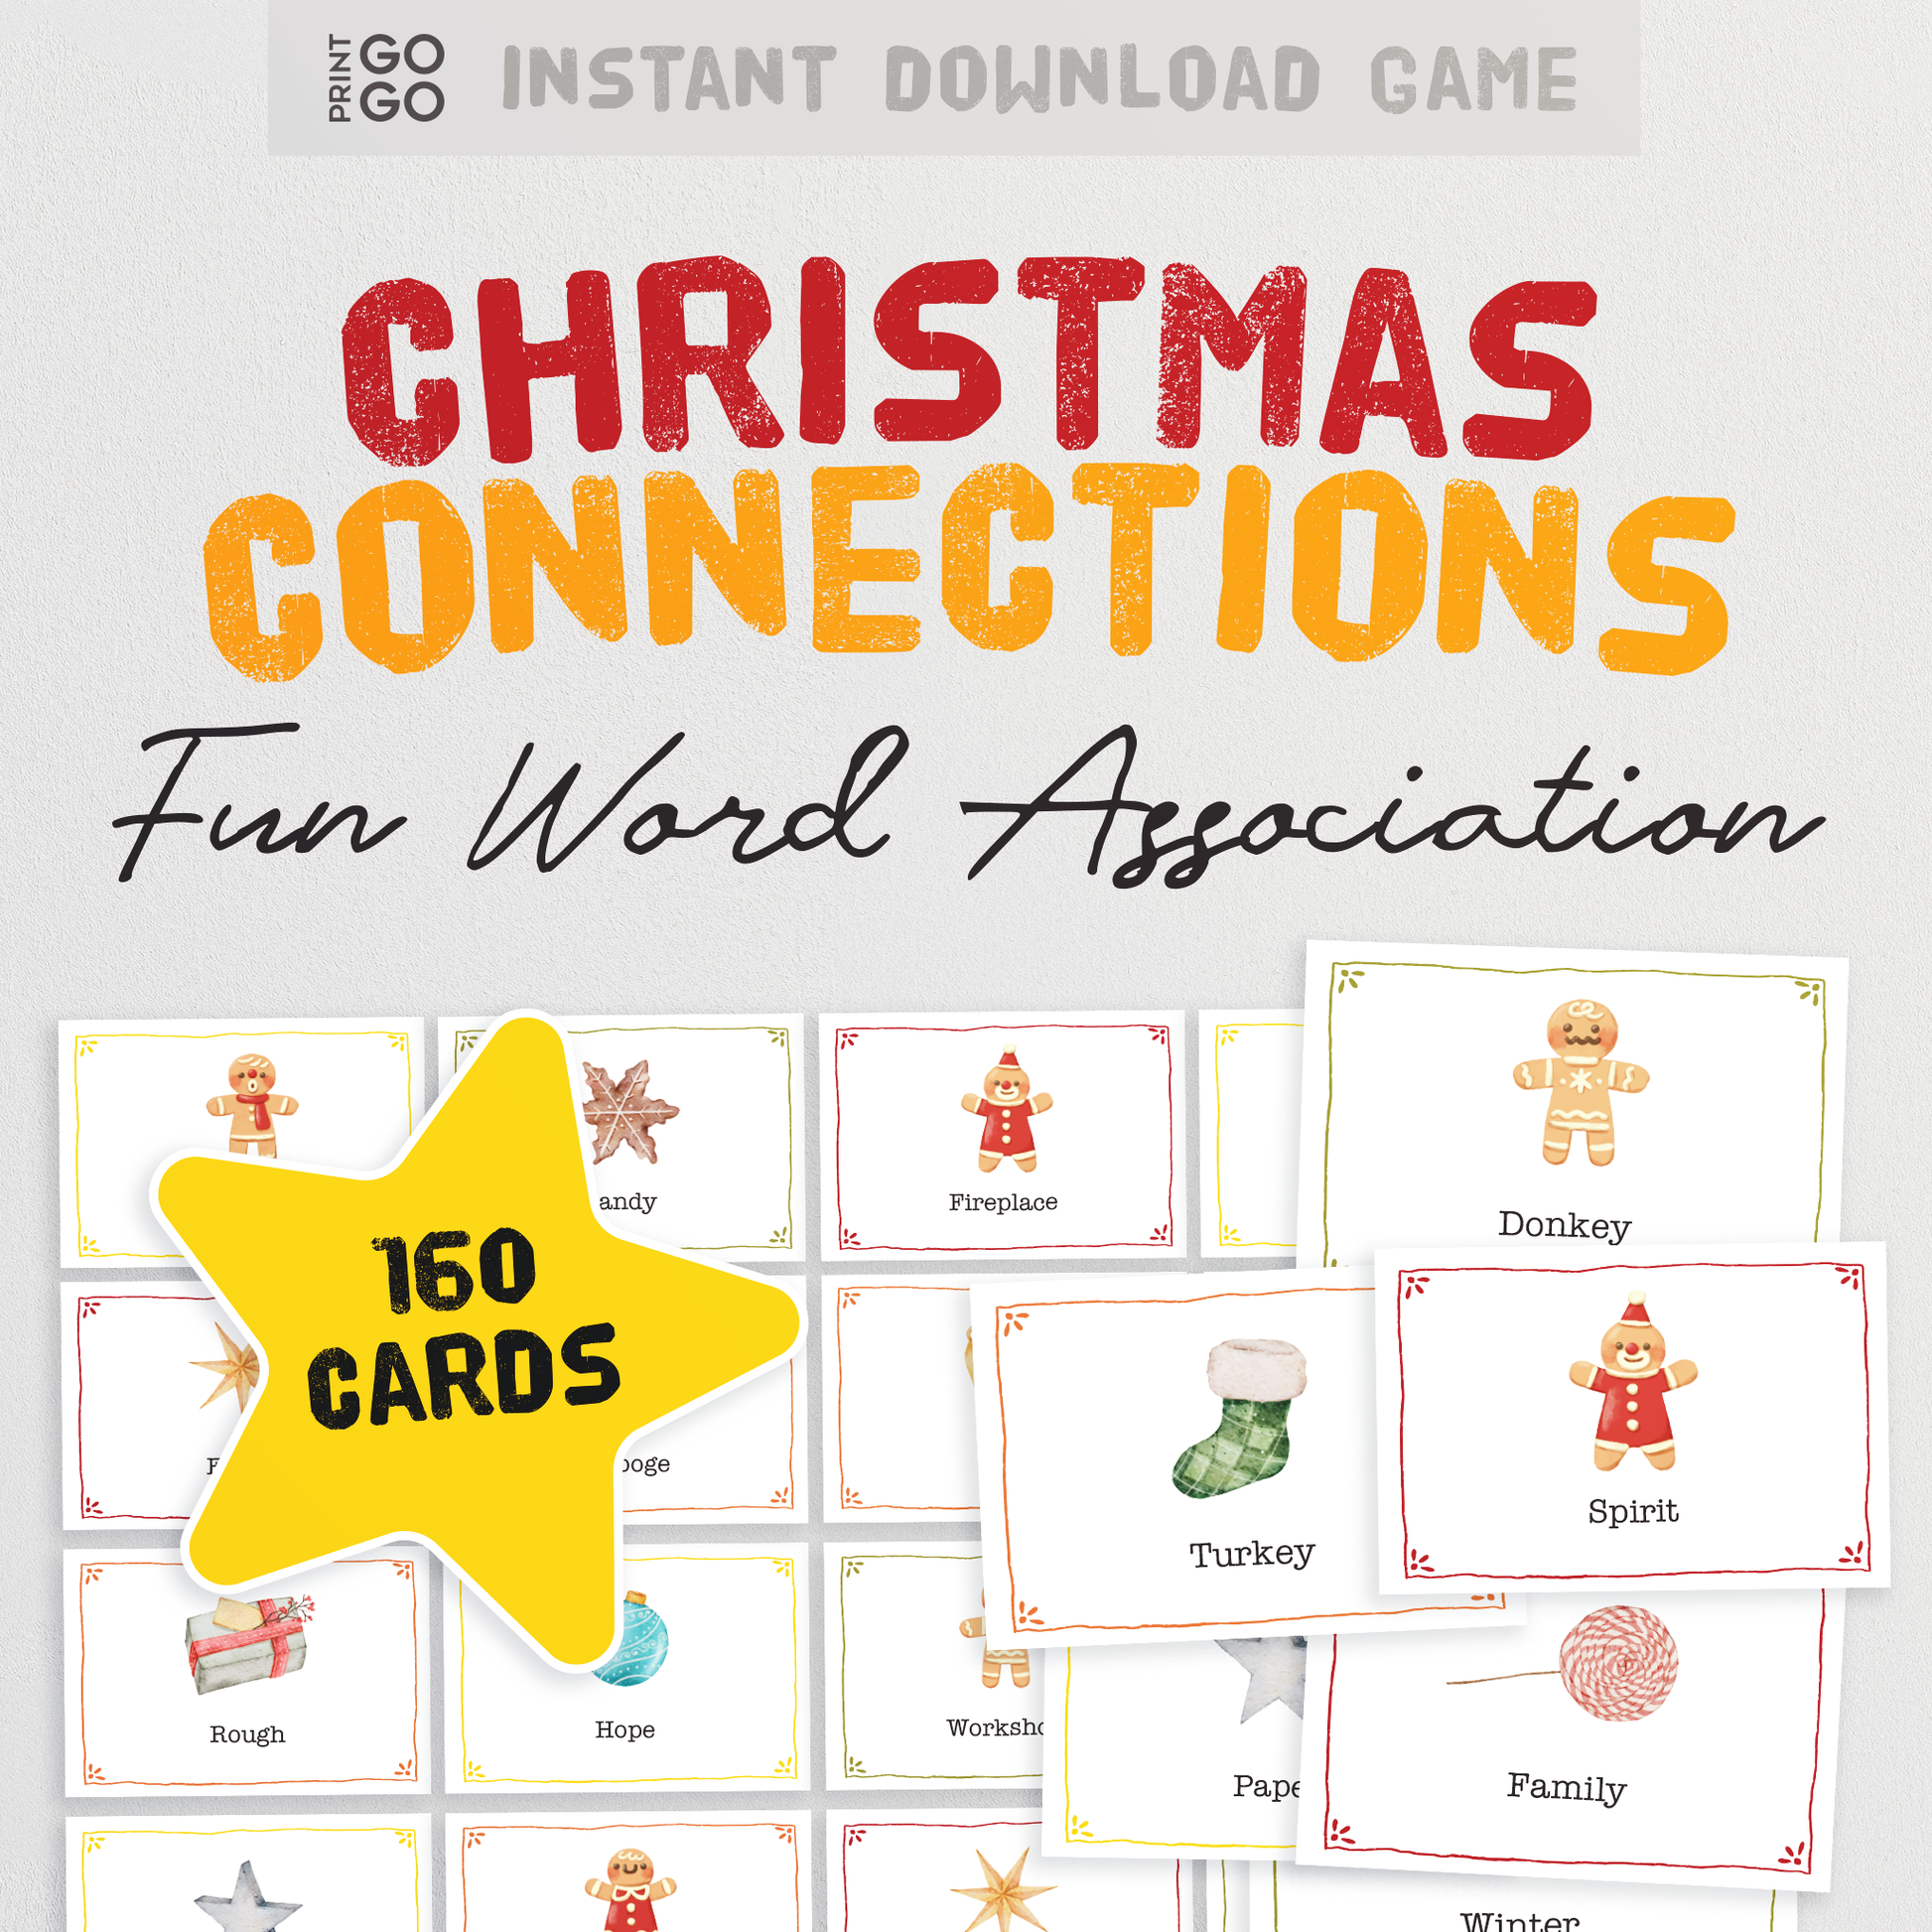 Christmas Connections Game - The Fun and Fast Family Game Of Christmas Word Association | Holiday Word Game | Holiday Party Group Game